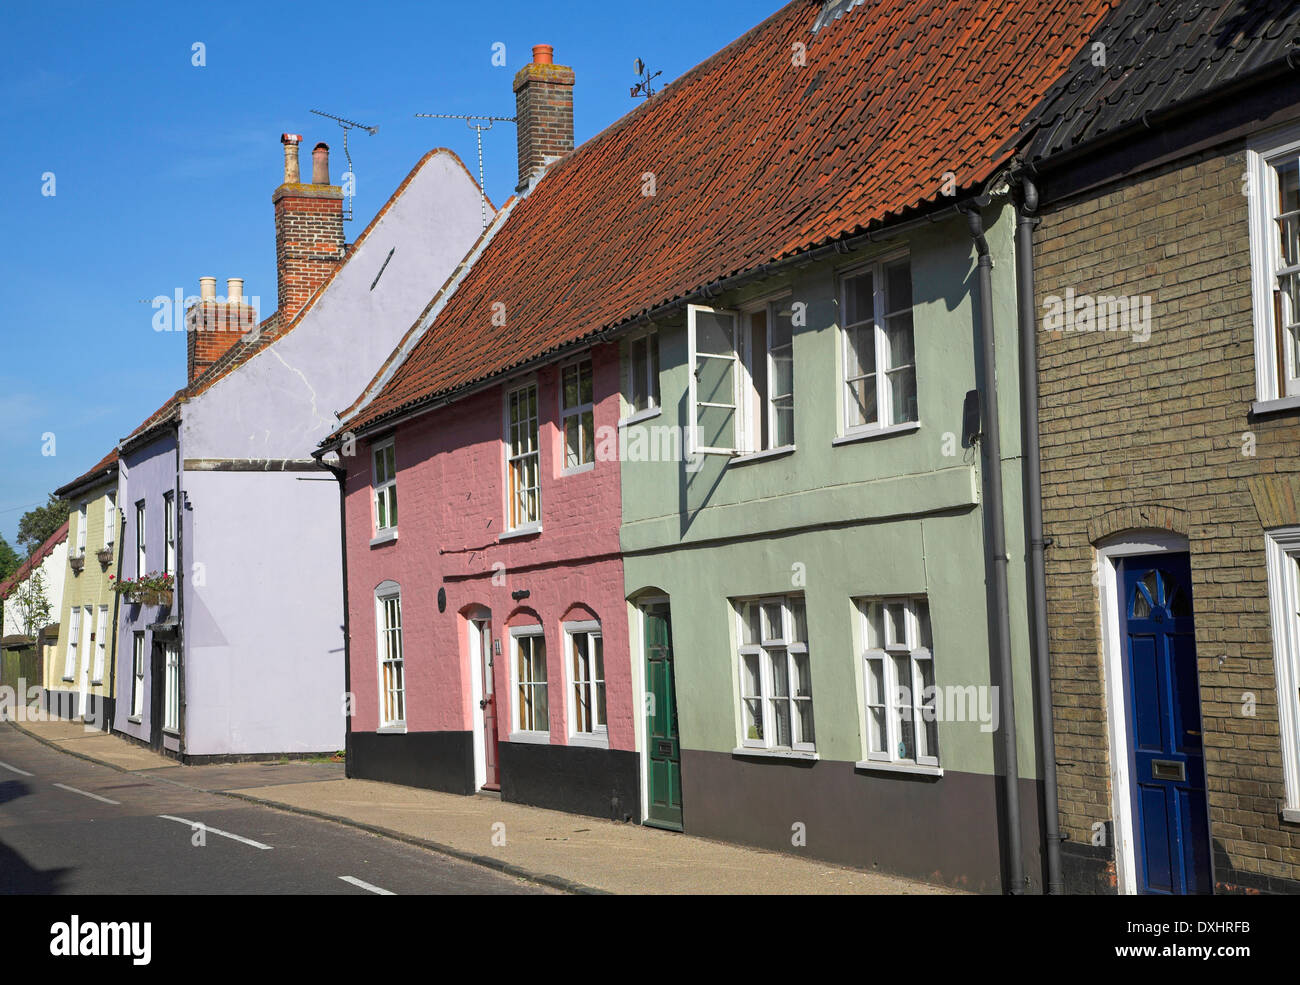 Brightly Coloured Historic Terraced Cottages Bridge Street